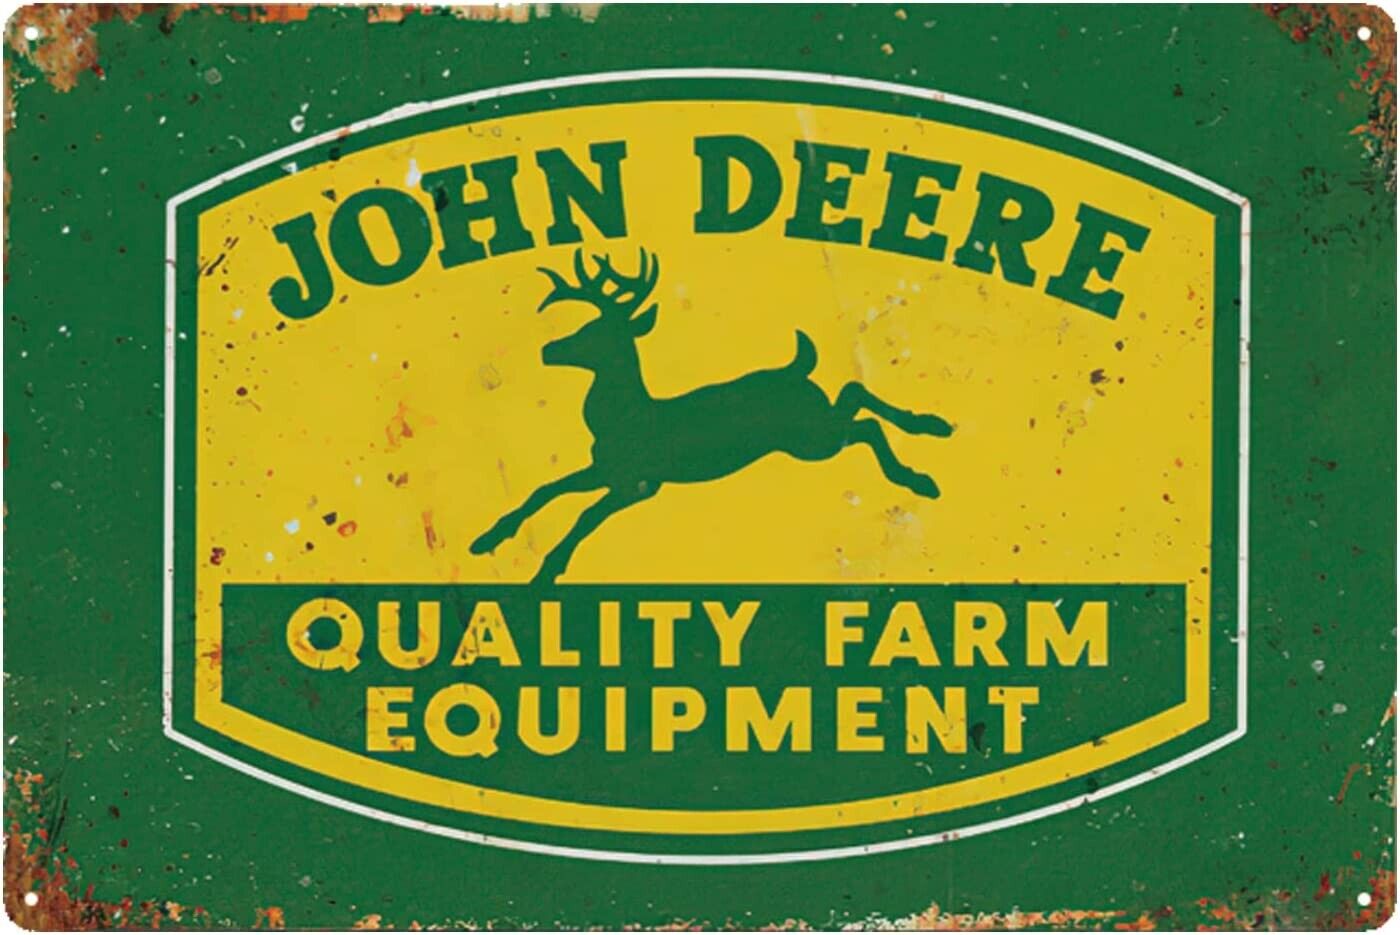 John Deere Farming Quality Agriculture Equipment Rustic Metal Sign 8x12 Inches